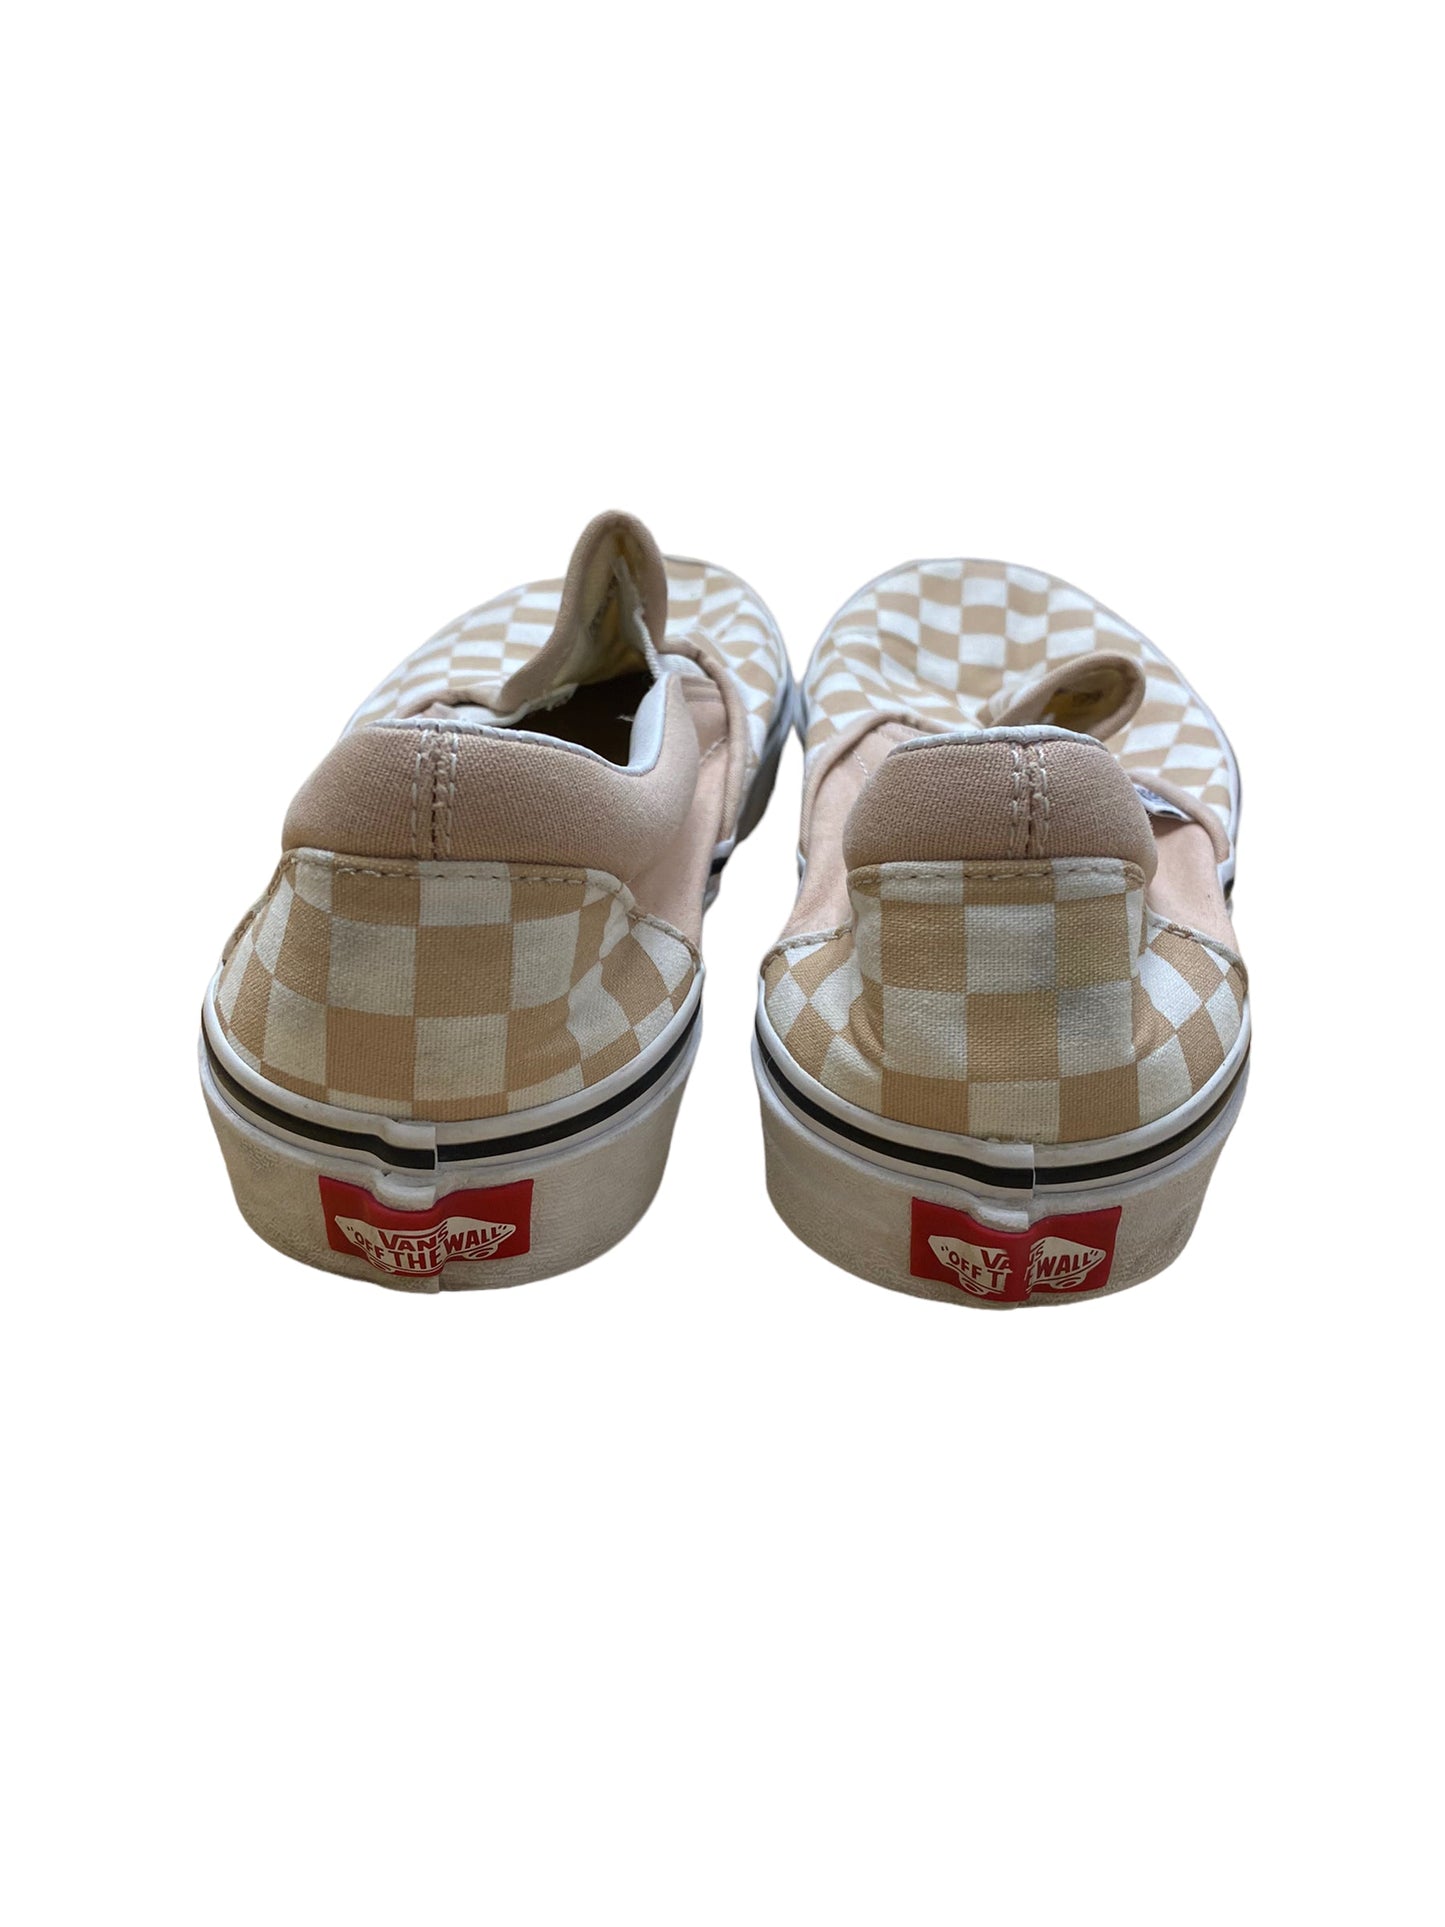 Shoes Flats Boat By Vans  Size: 10